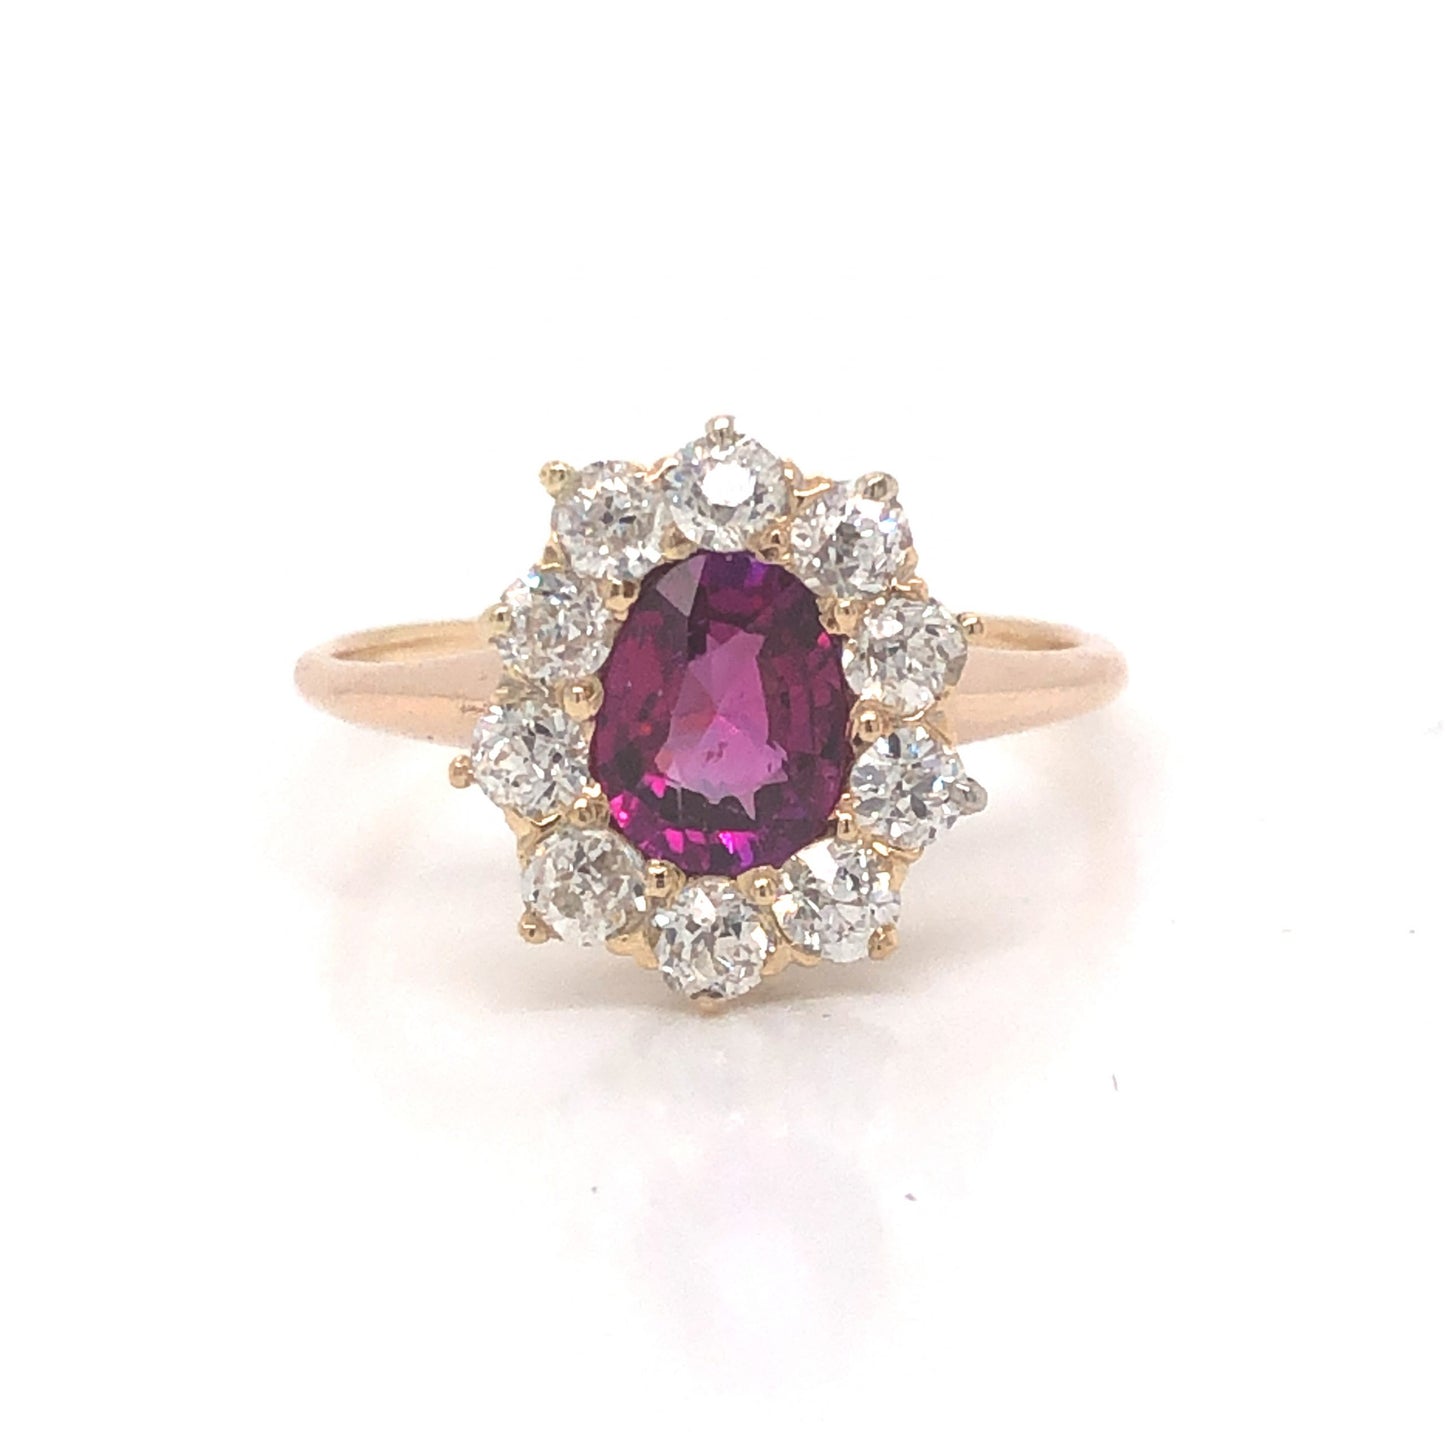 Victorian Pink Sapphire & Diamond Ring in 14k Yellow Gold